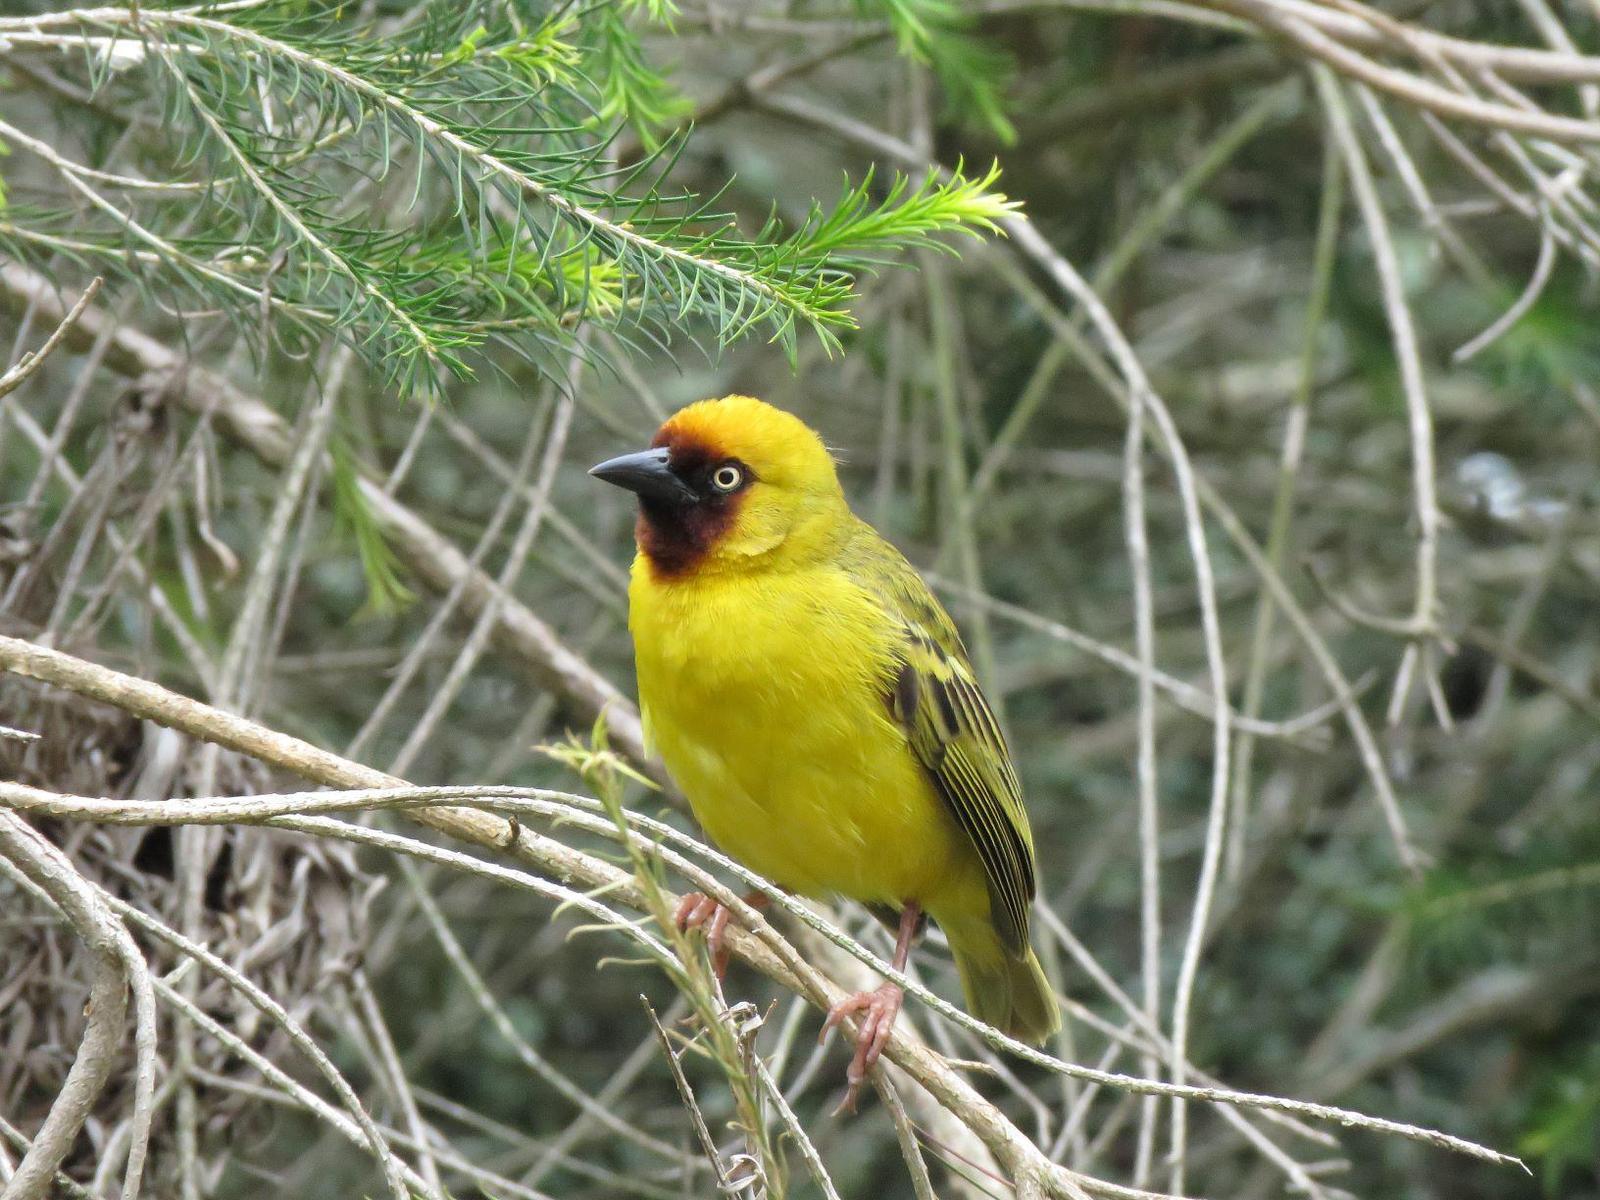 Northern Brown-throated Weaver Photo by Cyndee Pelt